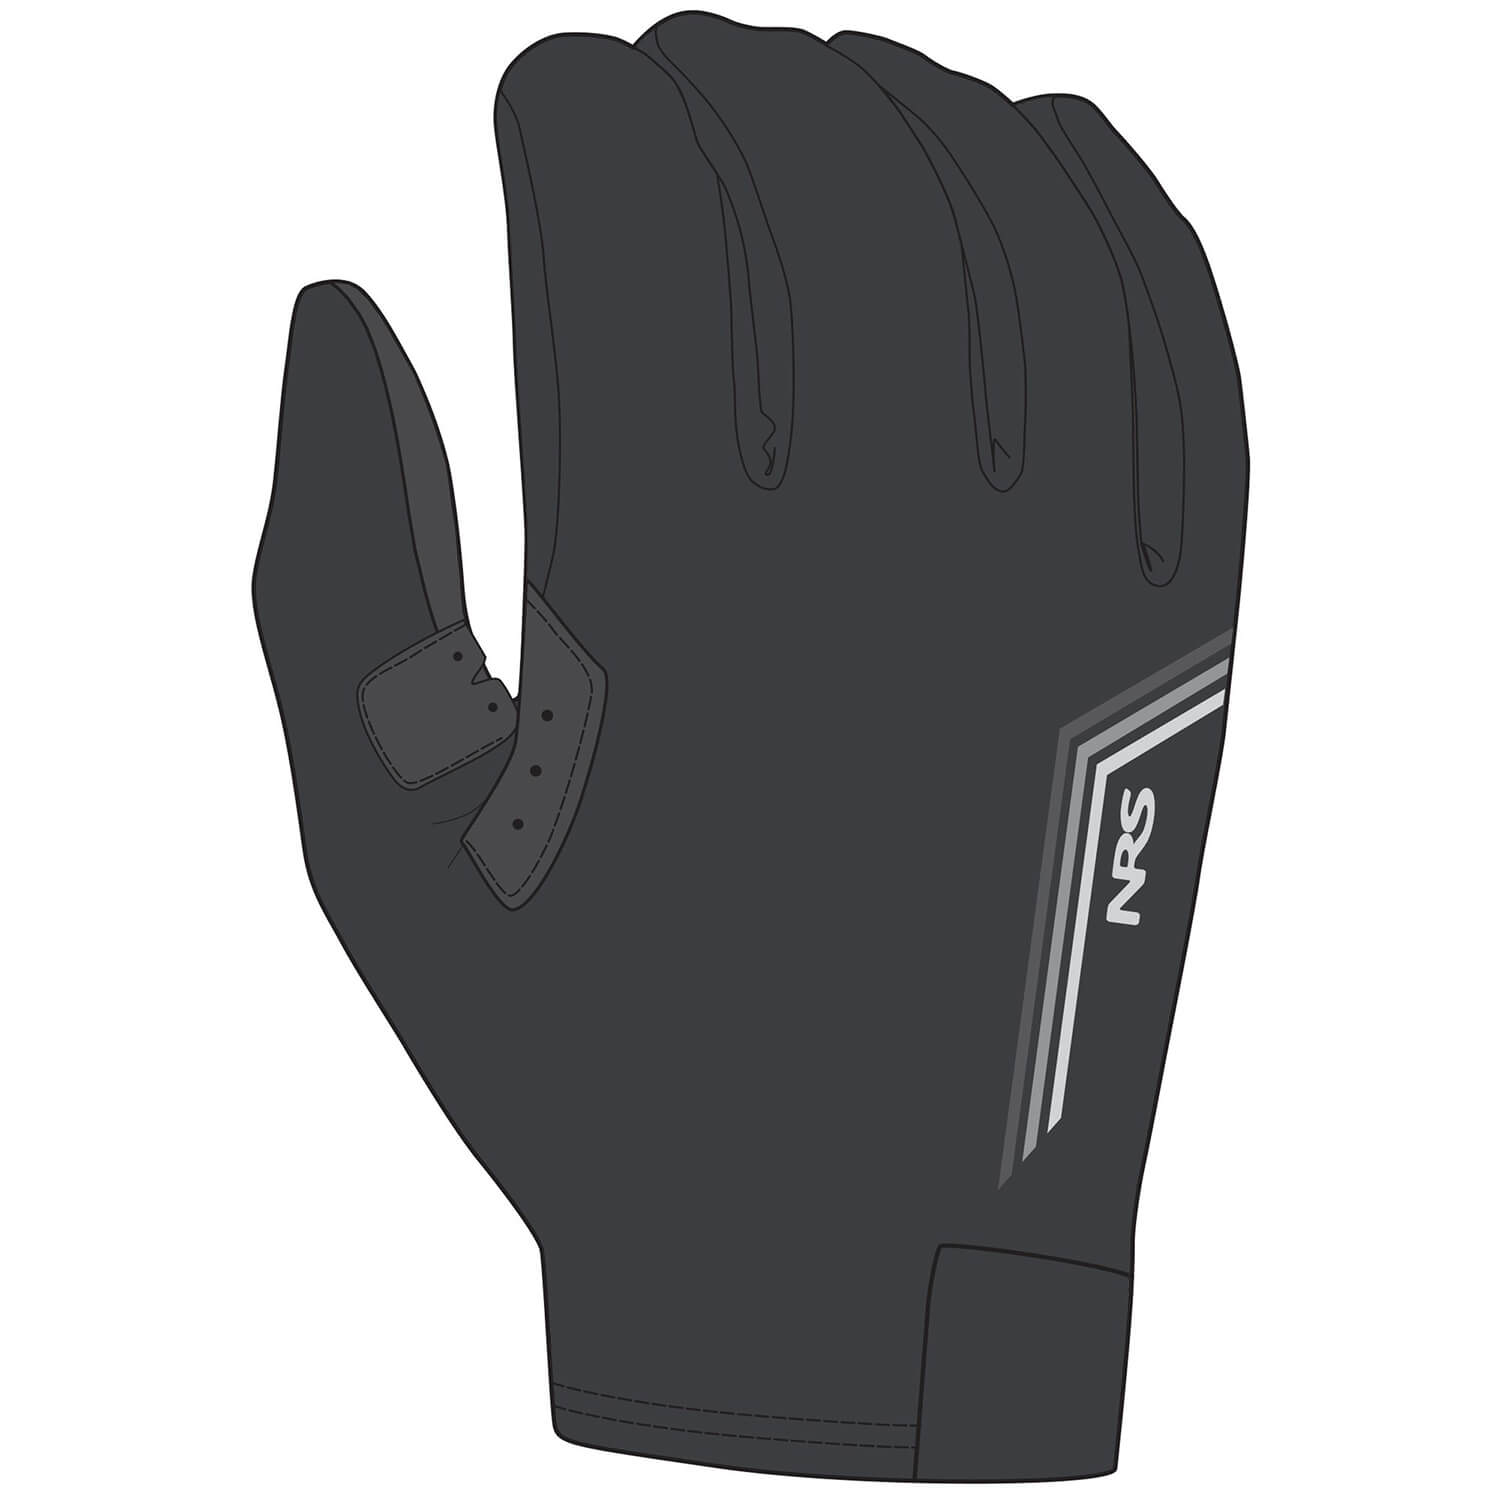 NRS Gloves for Boat and Kayak Mens Cove Gloves Black - Picture 1 of 1